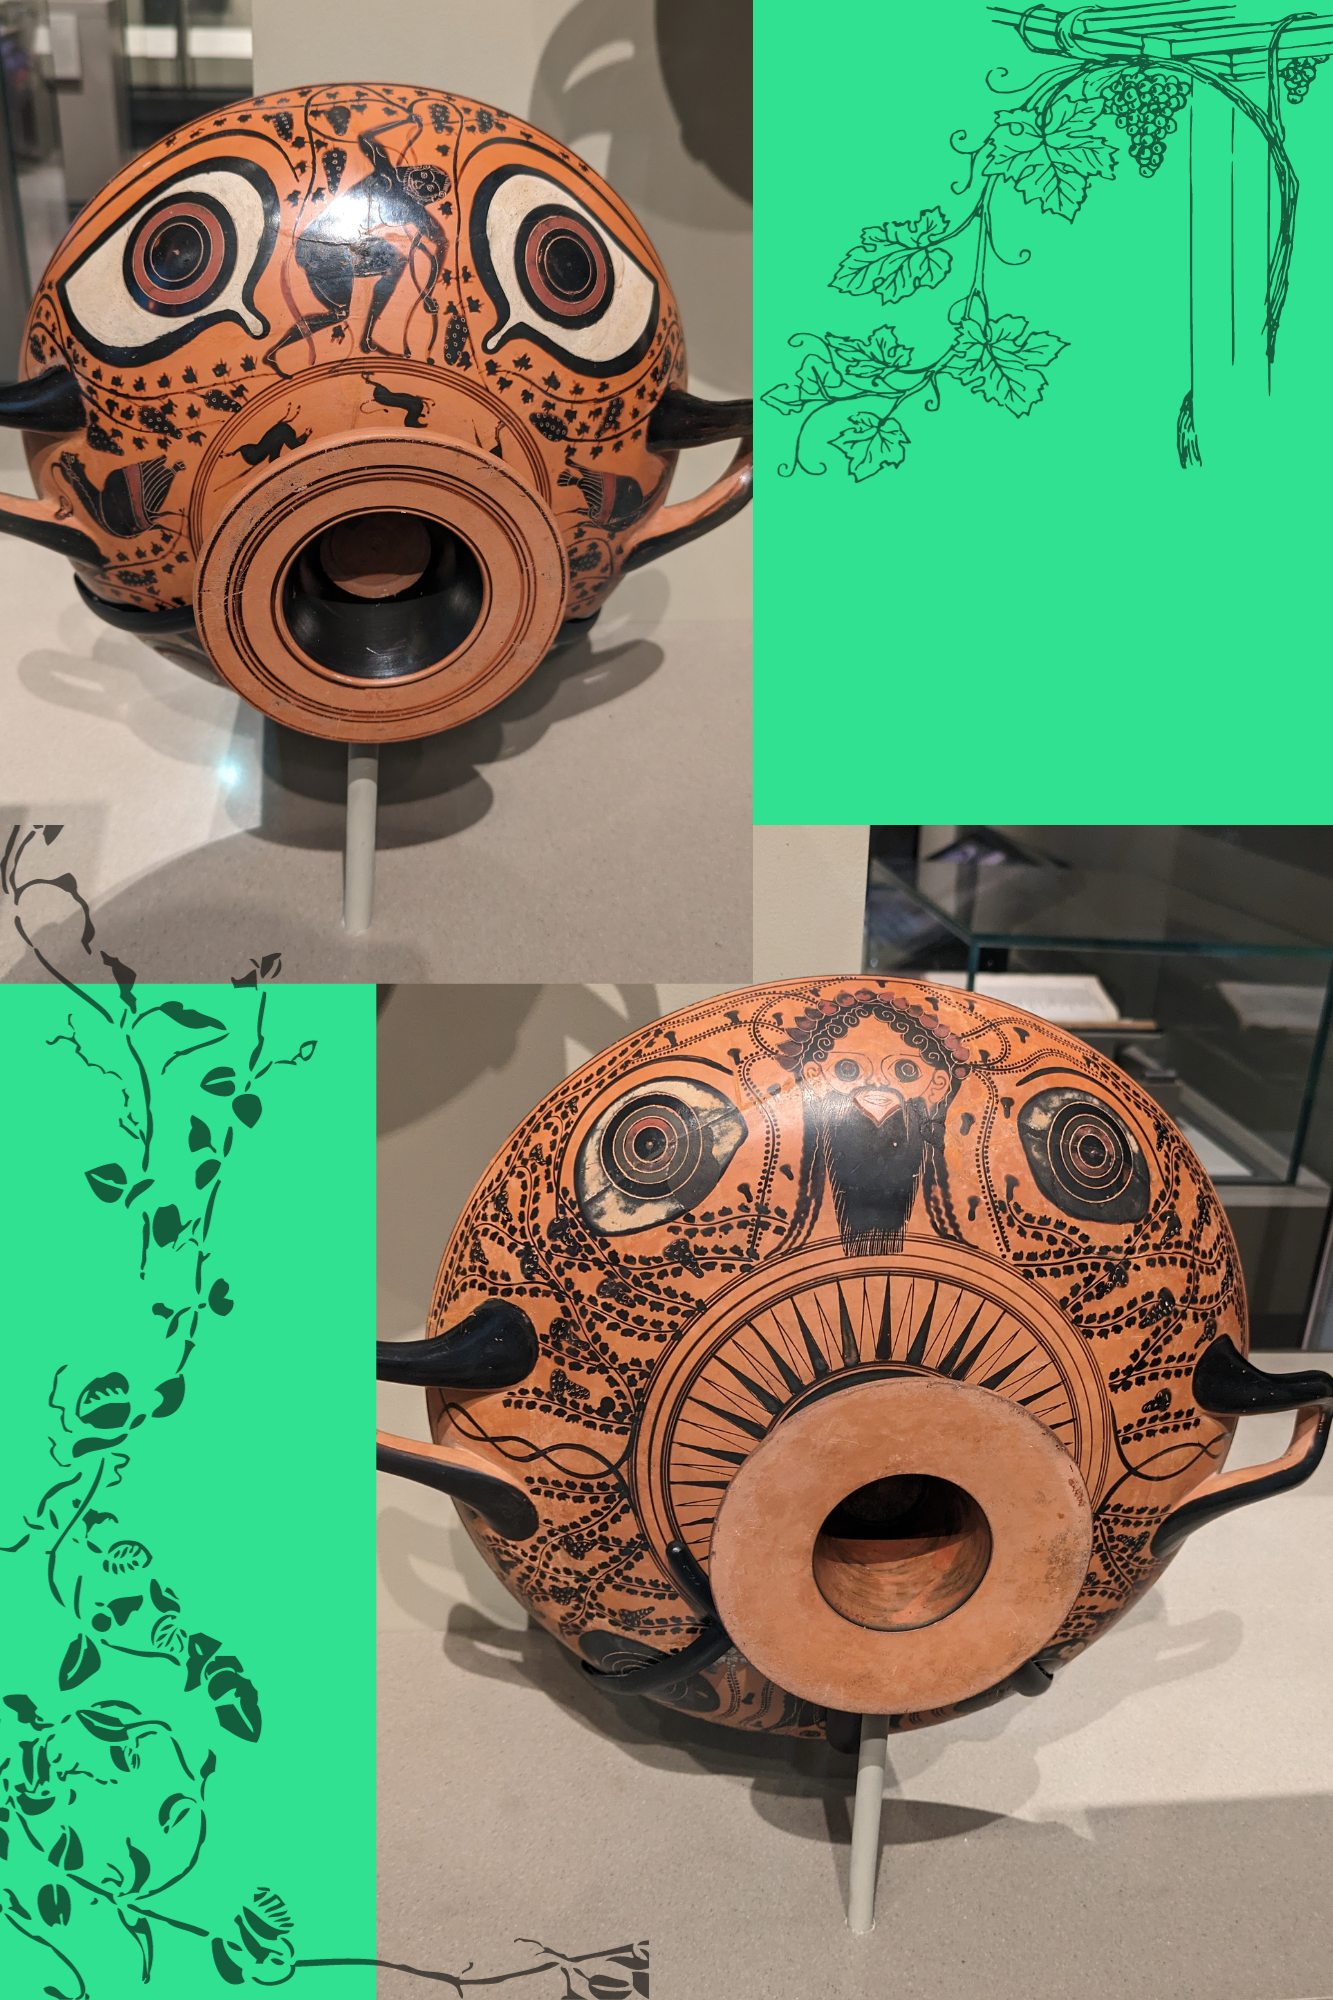 A collage of two drinking vessels upturned to reveal large eyes painted onto them. One vessel depicts a figure dancing madly, surrounded by grape vines; the other depicts an equally mad looking Dionysus.